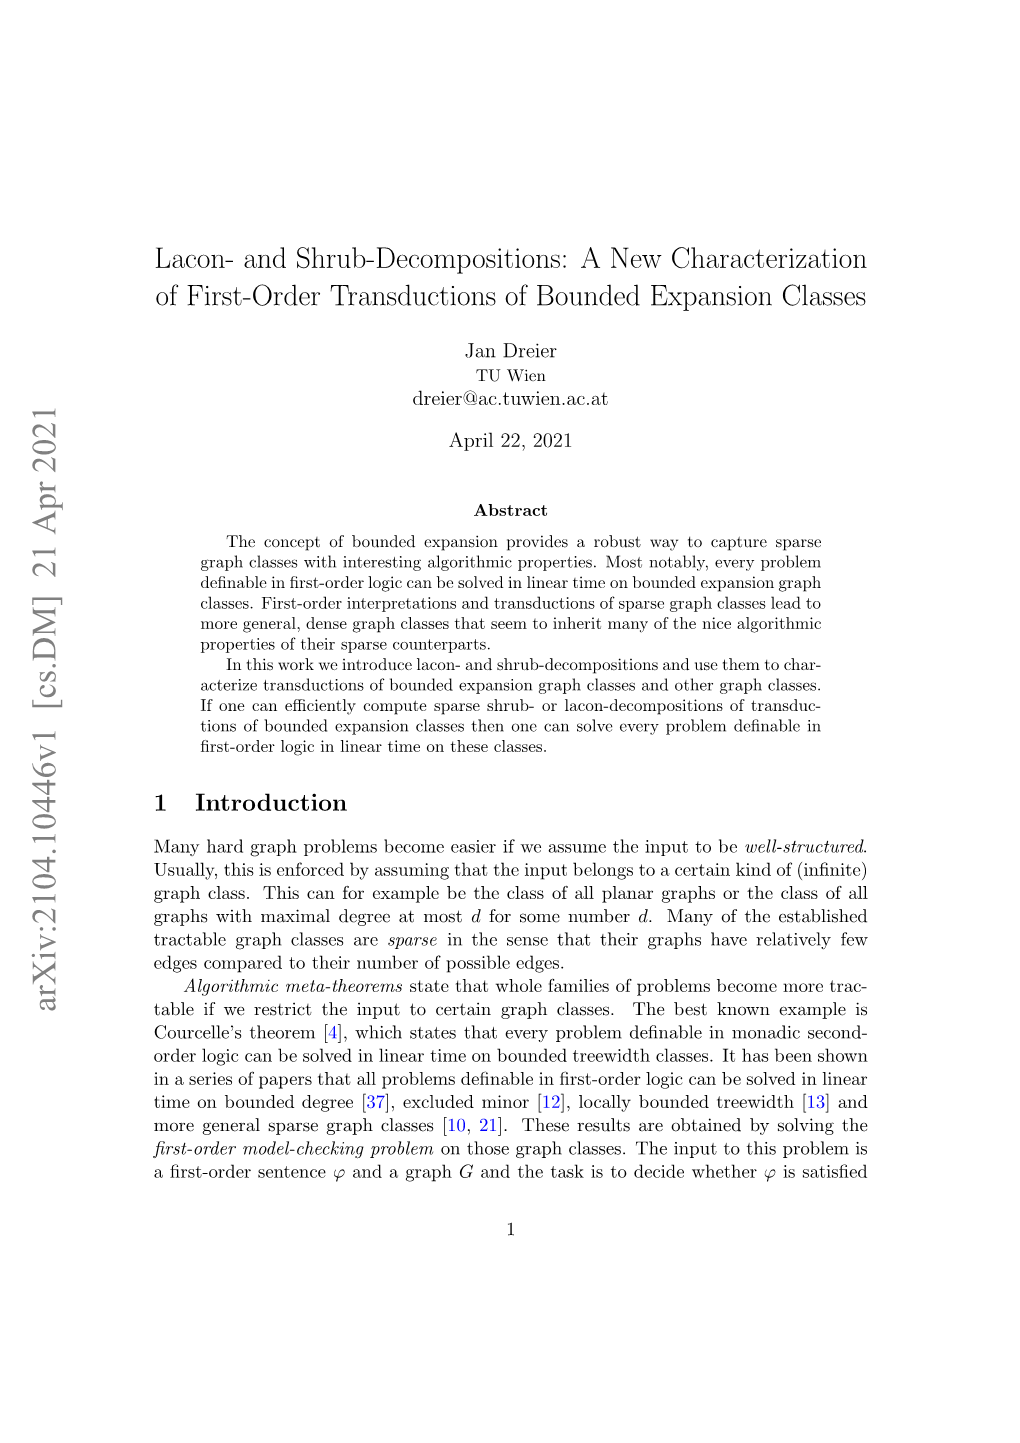 Lacon- and Shrub-Decompositions: a New Characterization of First-Order Transductions of Bounded Expansion Classes